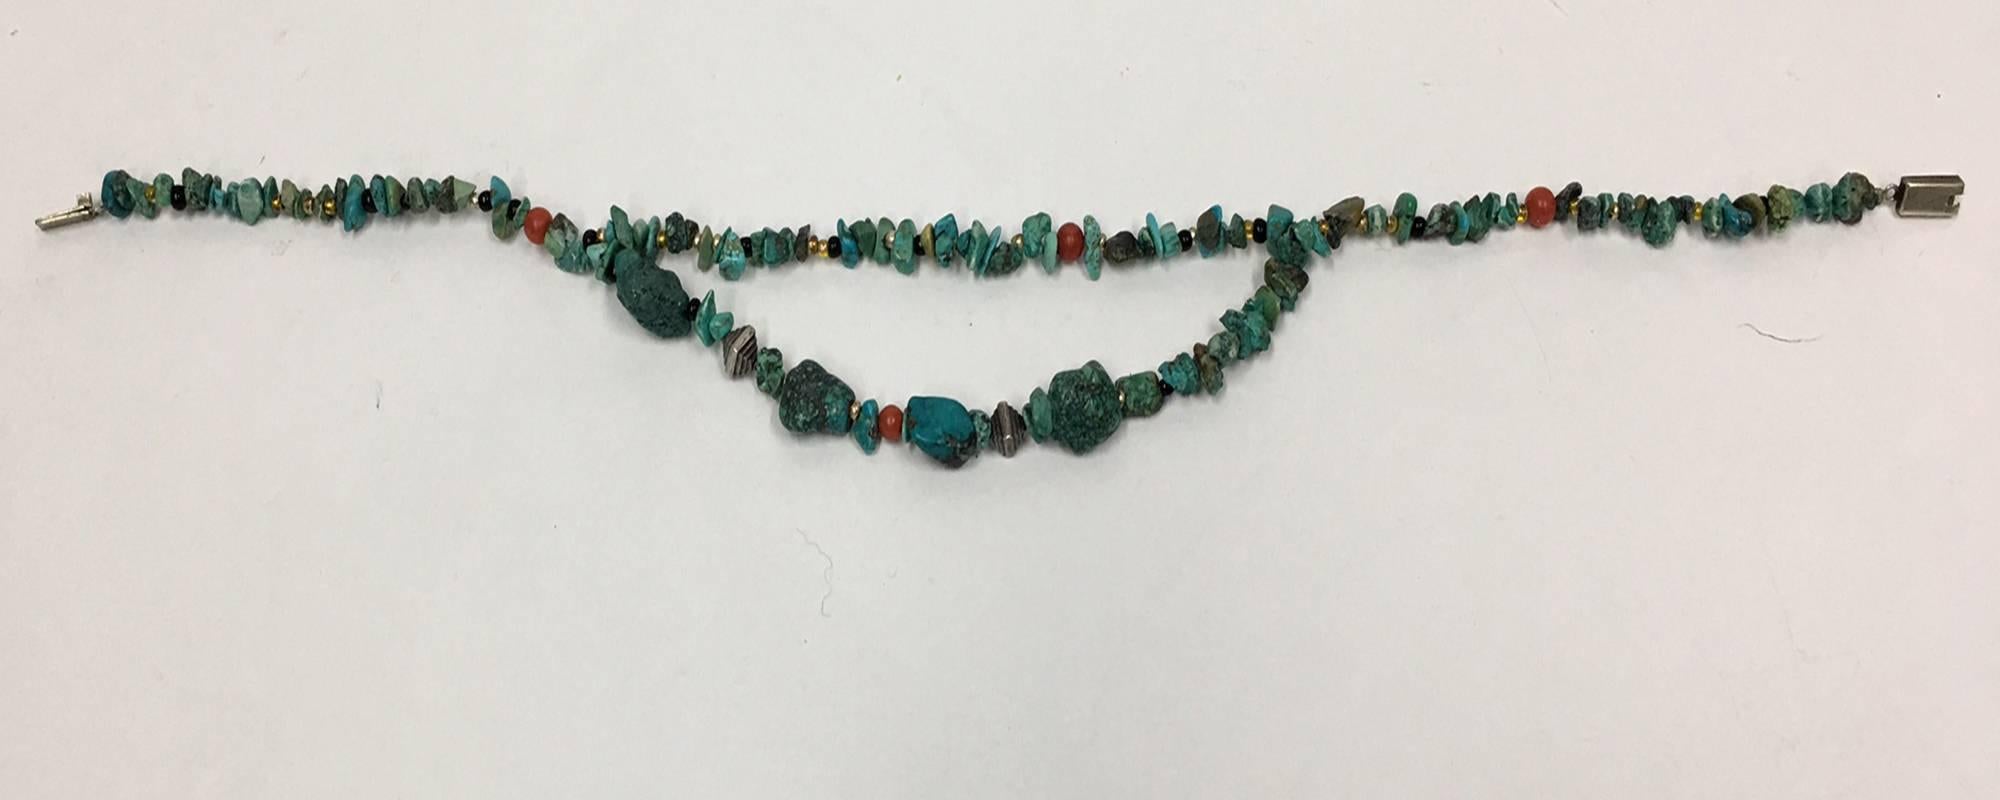 Beautiful necklace features two strands of Turquoise; each bead a different shape and size, accented with Coral and Sterling Silver. Handmade; approx. 15"-17" long. Vintage pieces creatively restyled by Anna K for a striking new look.